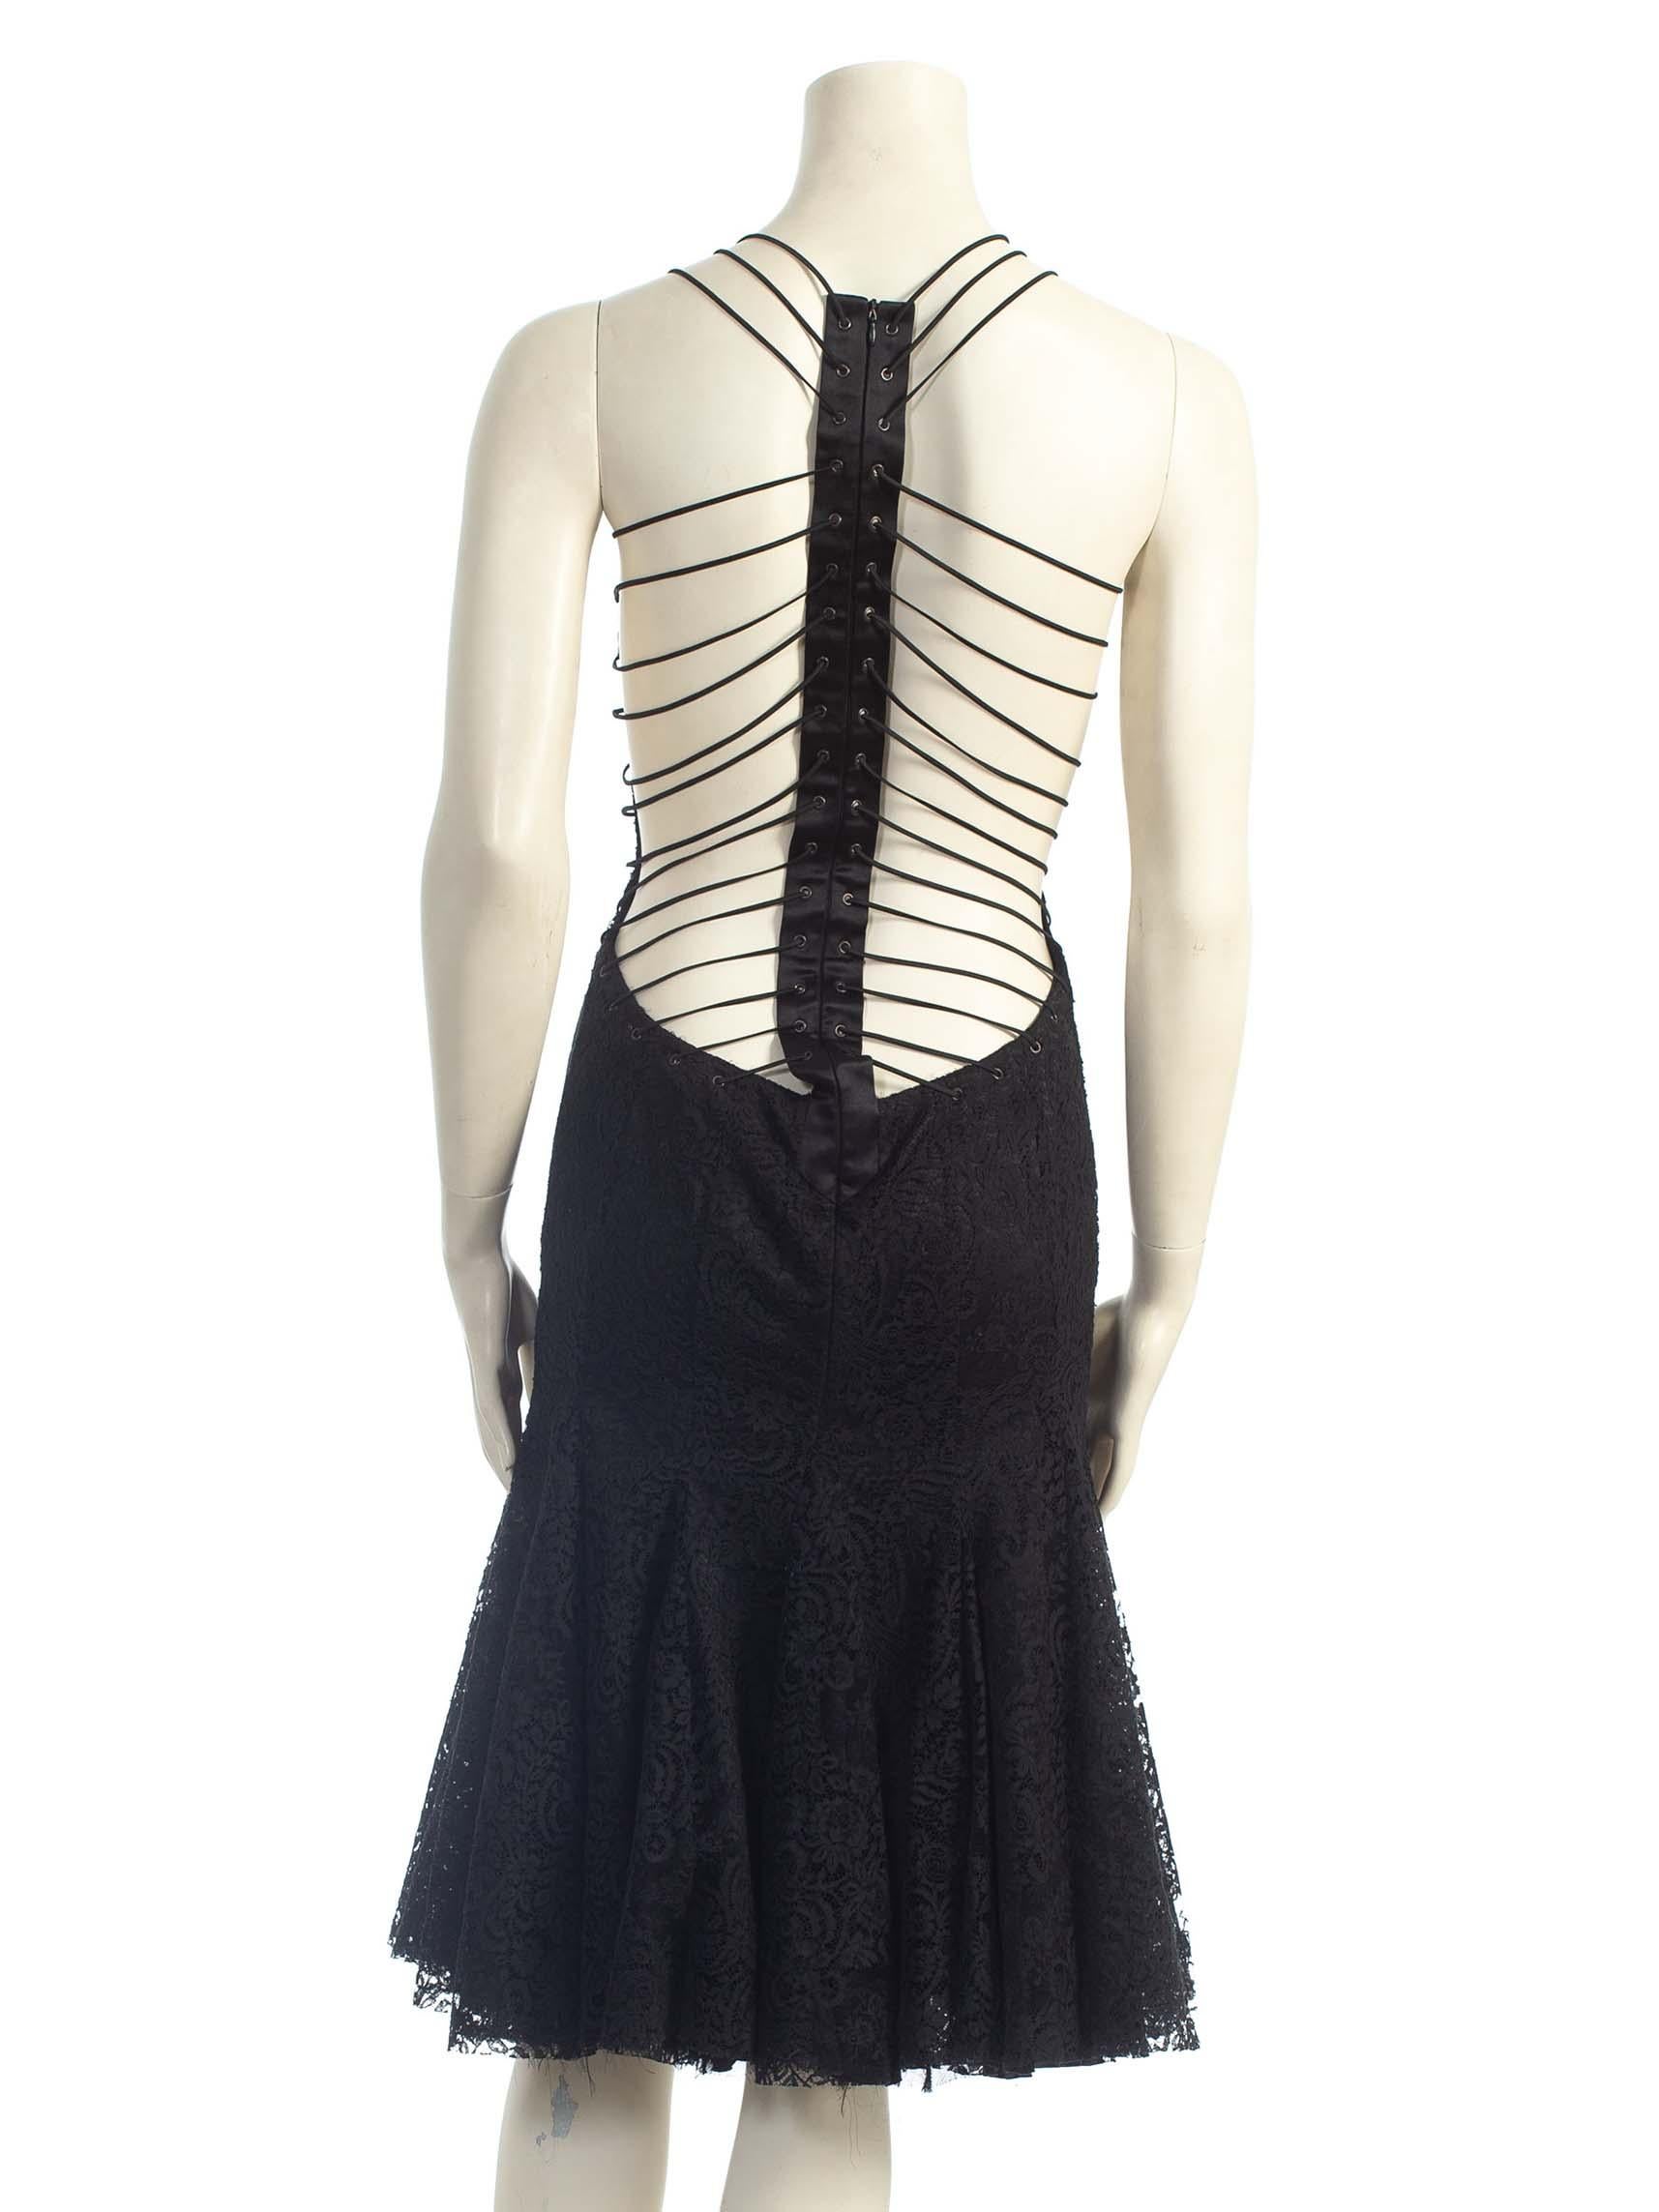 Women's 2000S ALEXANDER MCQUEEN Black Backless Rayon & Silk Lace Cocktail Dress With Sh For Sale